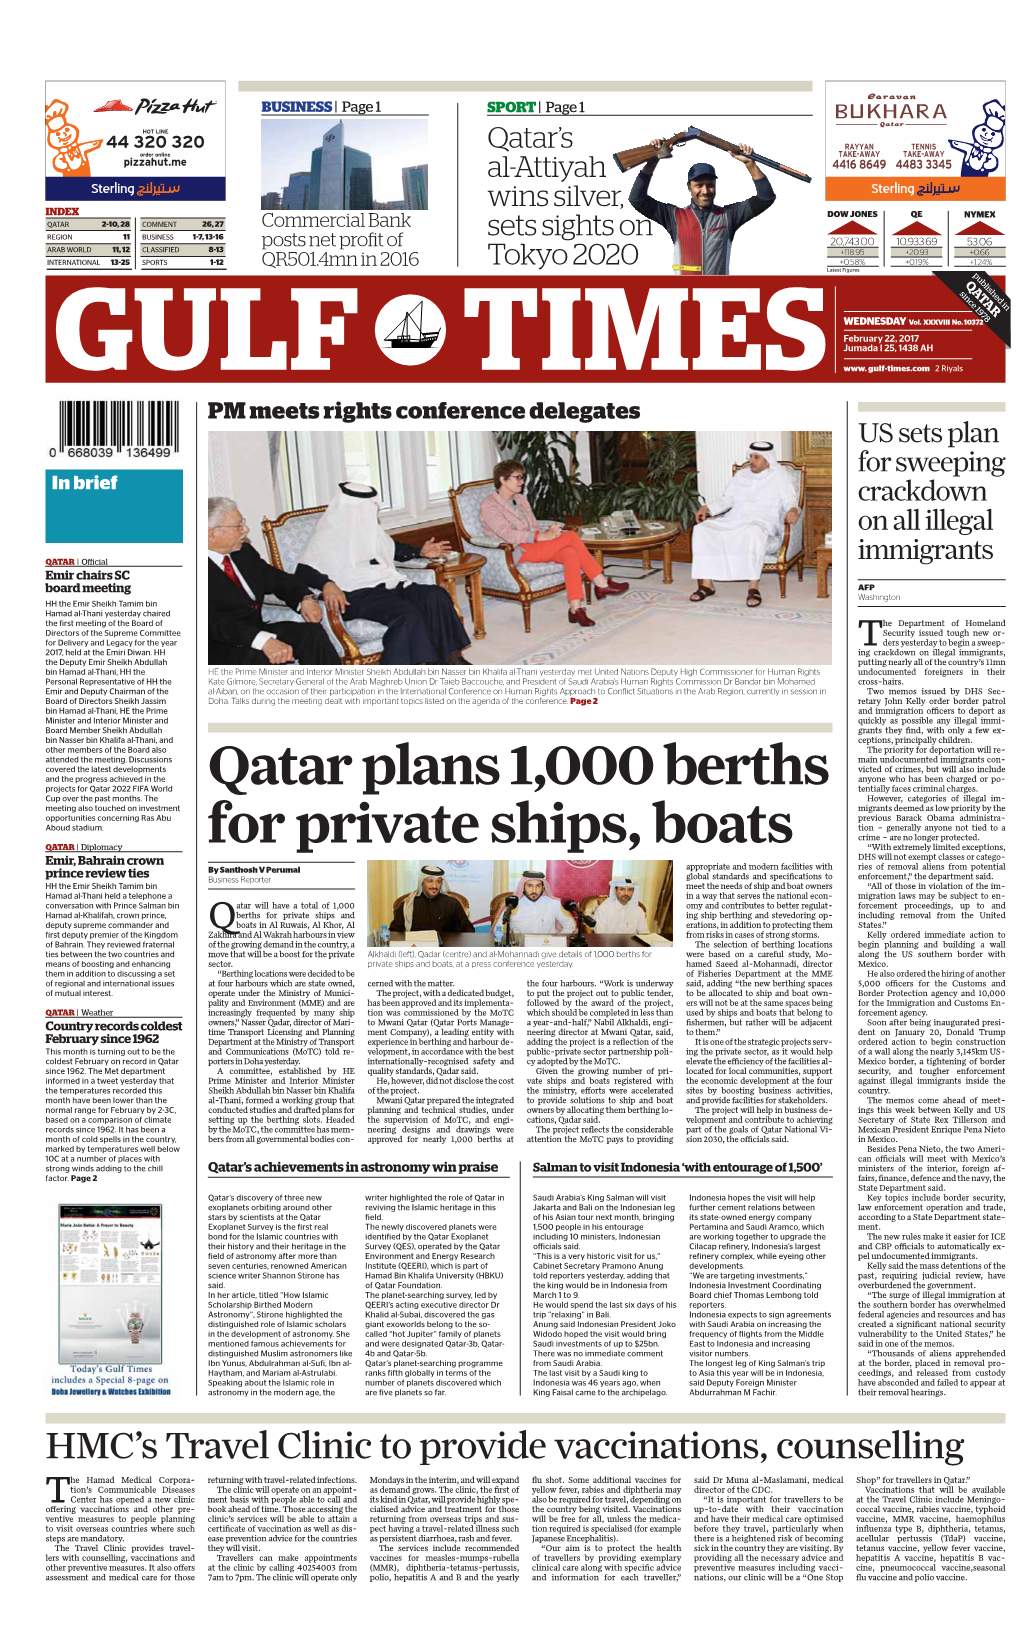 Qatar Plans 1,000 Berths for Private Ships, Boats